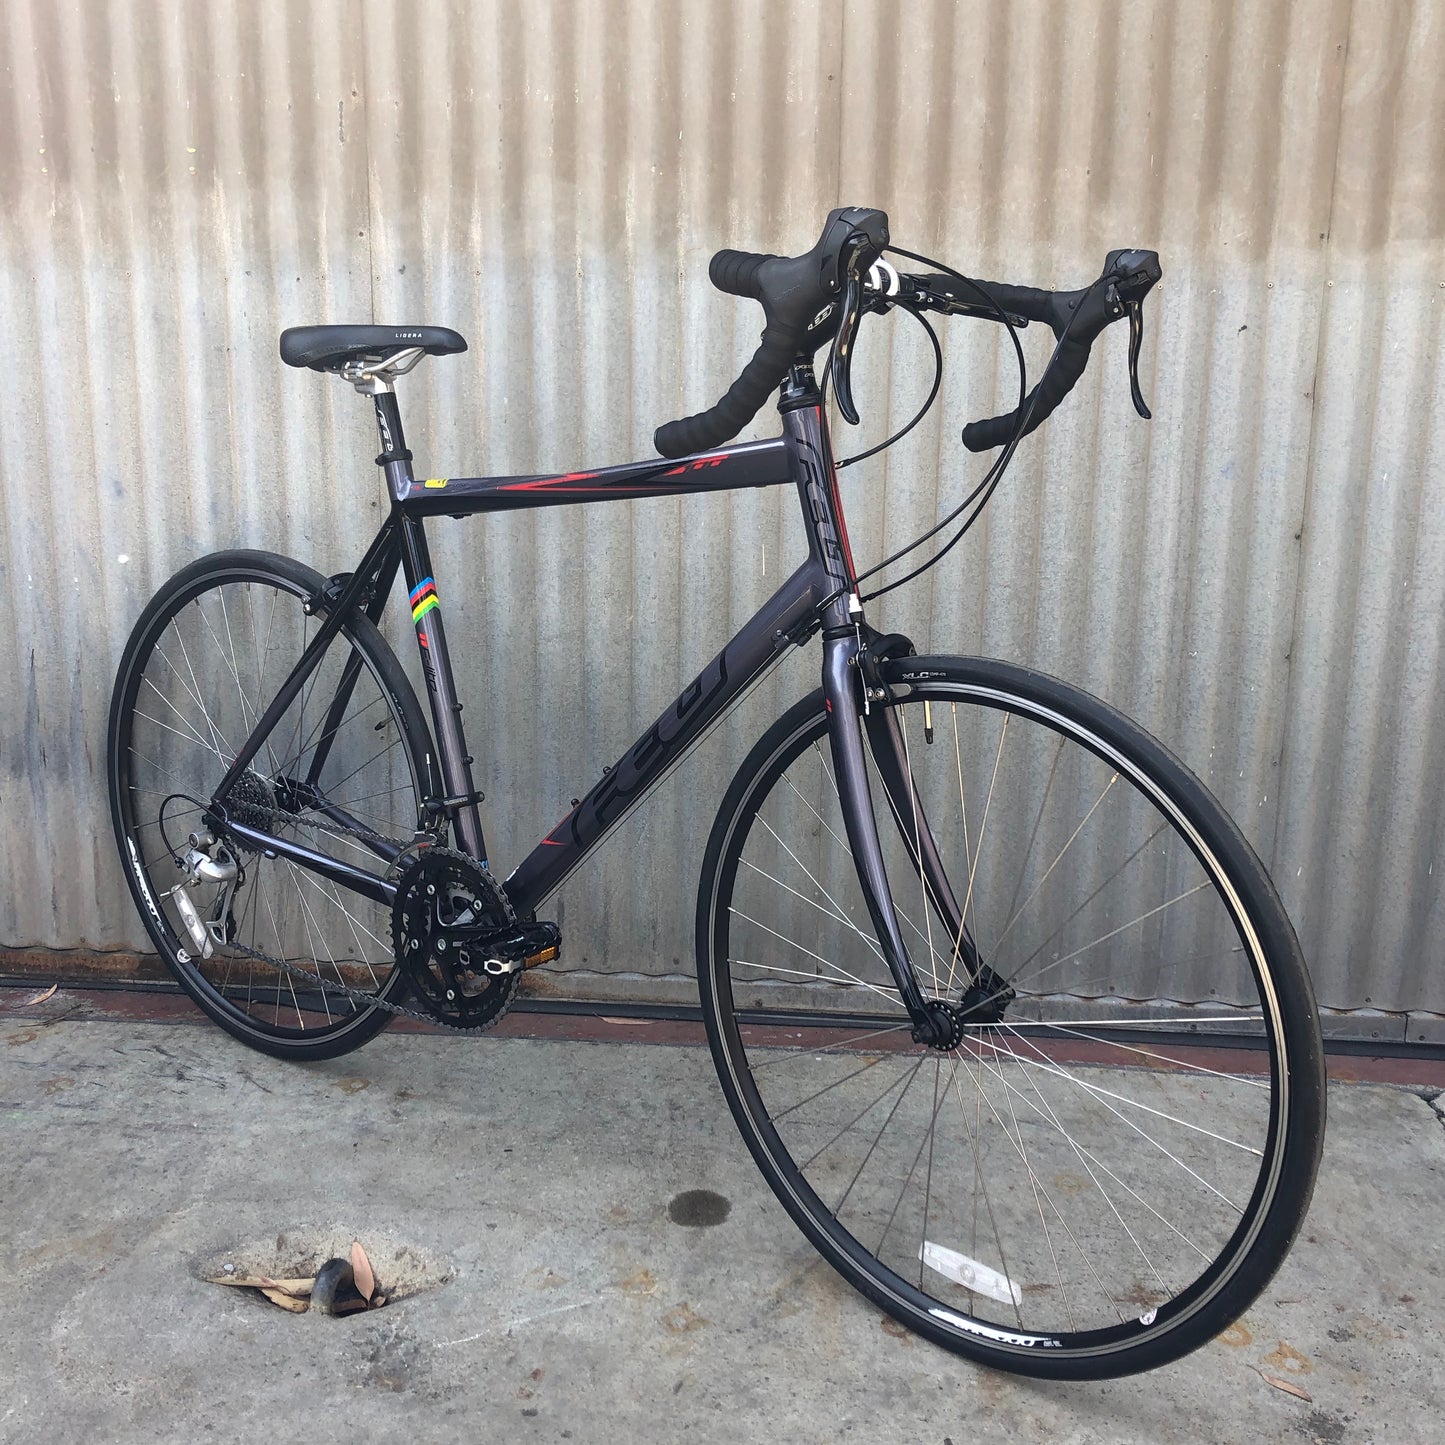 Felt Z100 - Great Used, Super Clean Entry Level Road Bike from a Great Brand